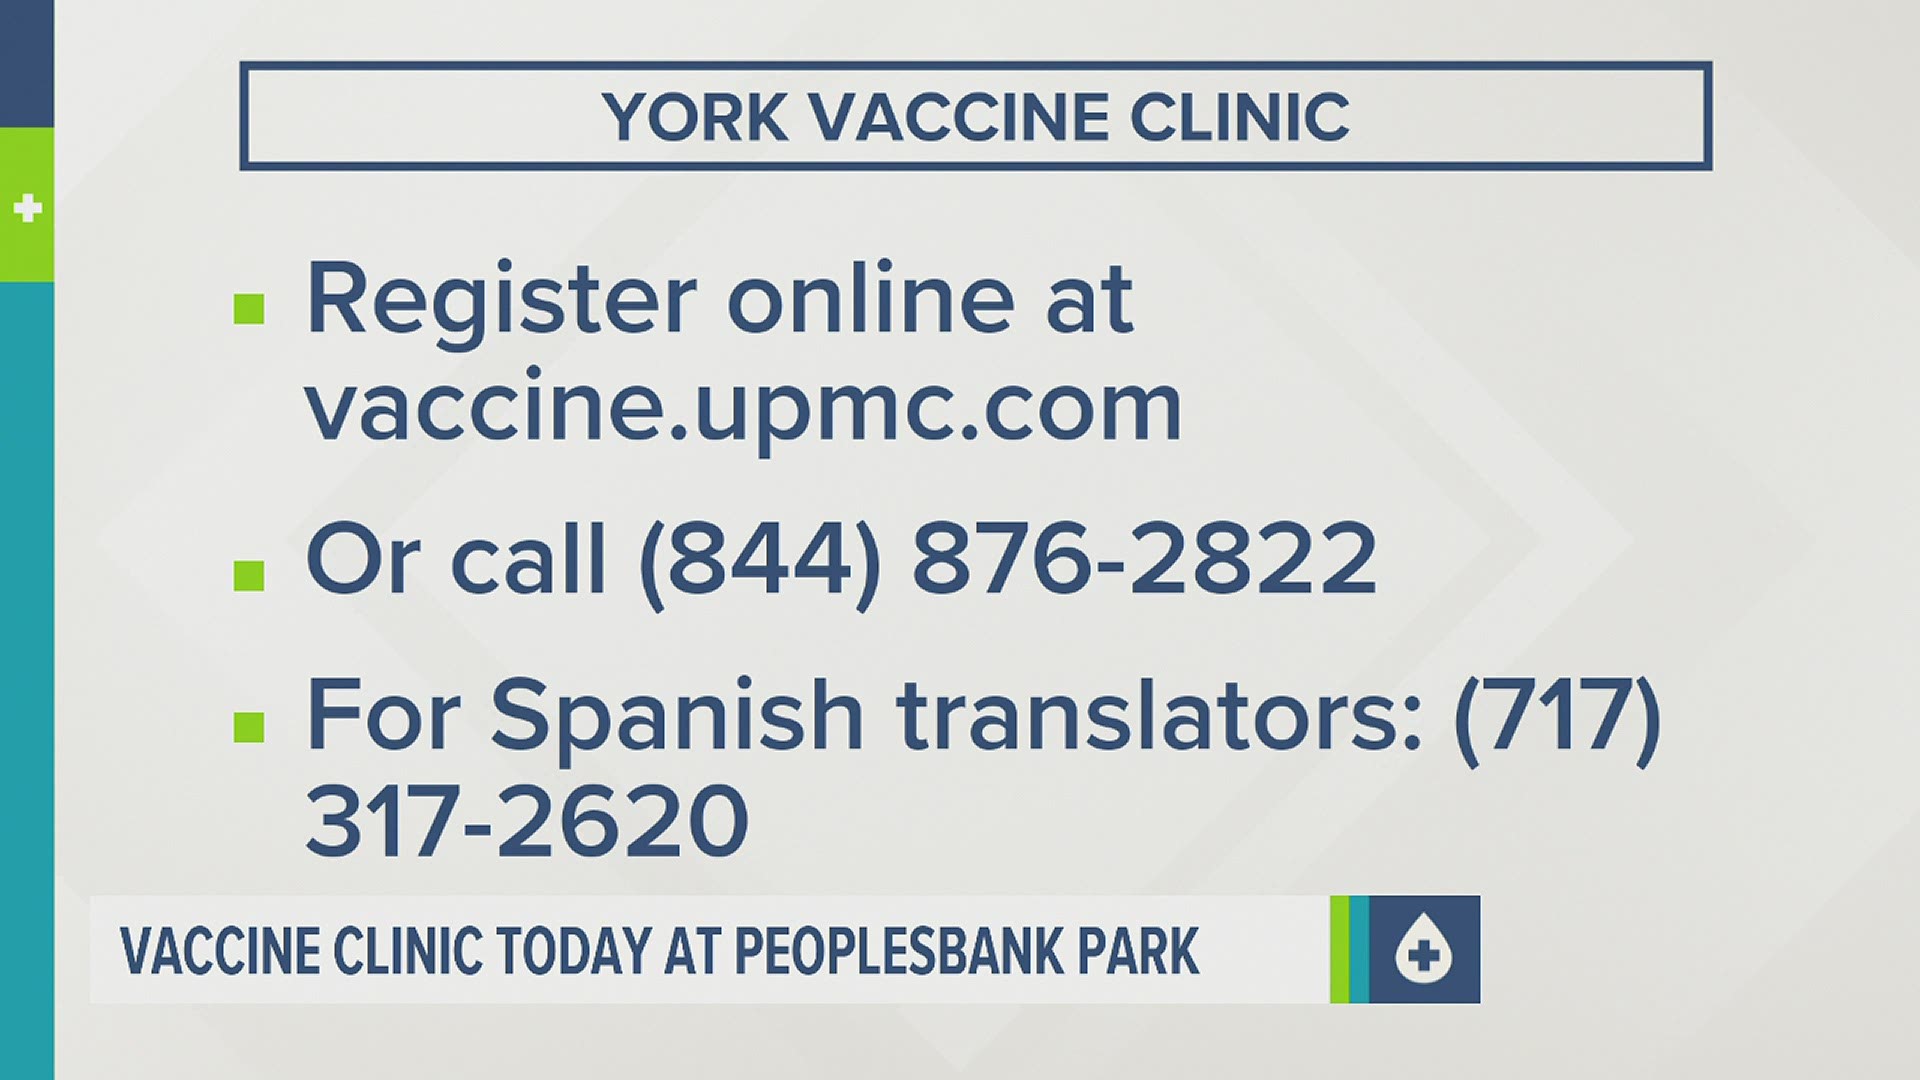 At Wednesday's clinic, UPMC will be administering 1,000 Moderna vaccines by appointment only.